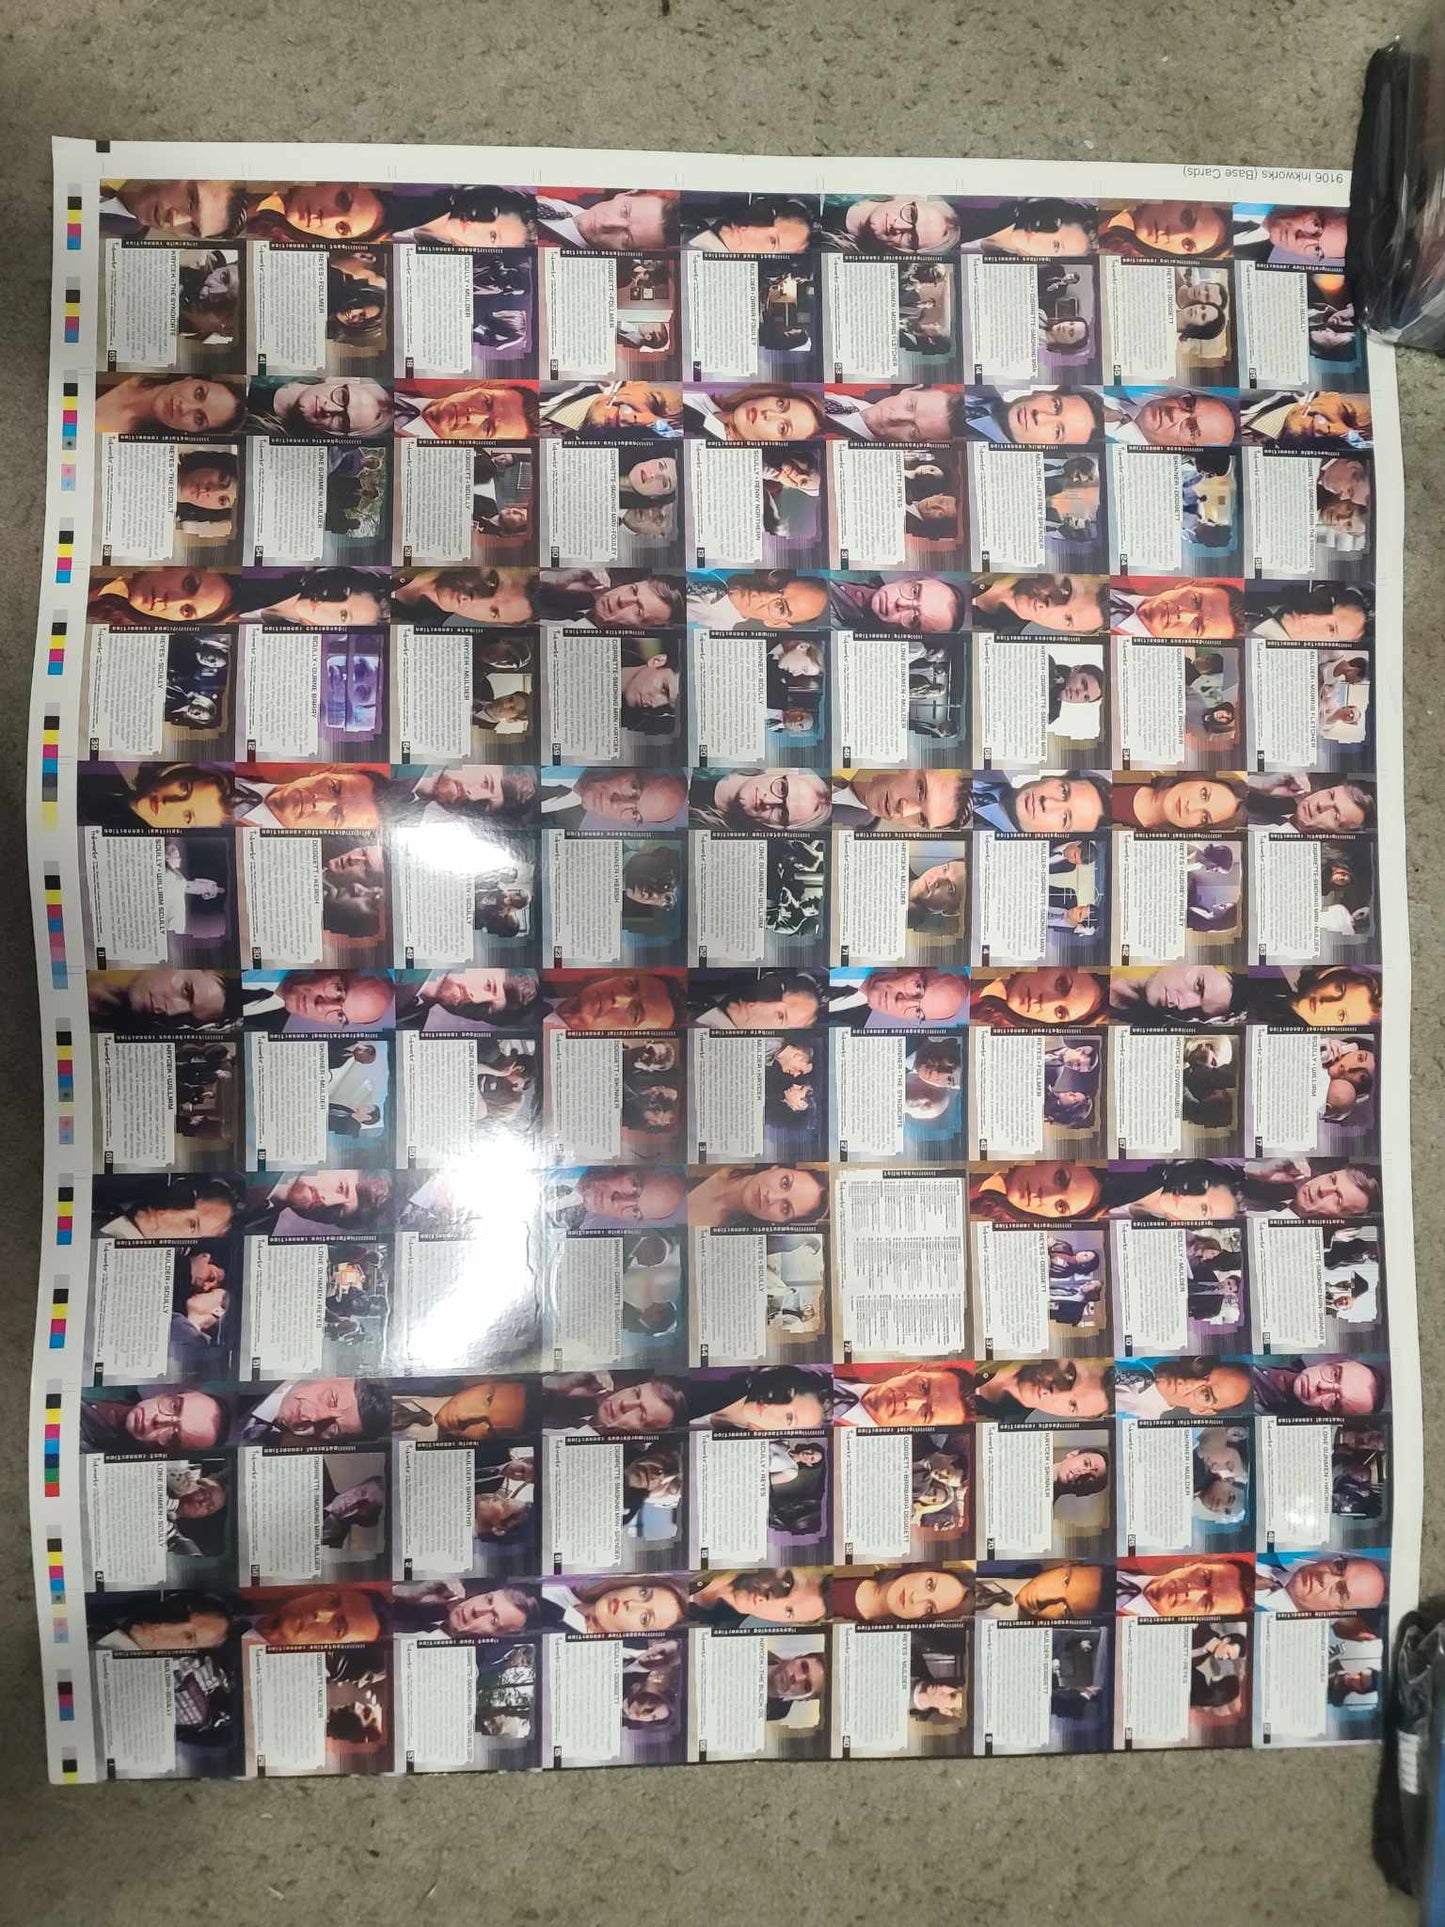 Connections-Trading card Uncut Sheet - Full Size Printer Sheet